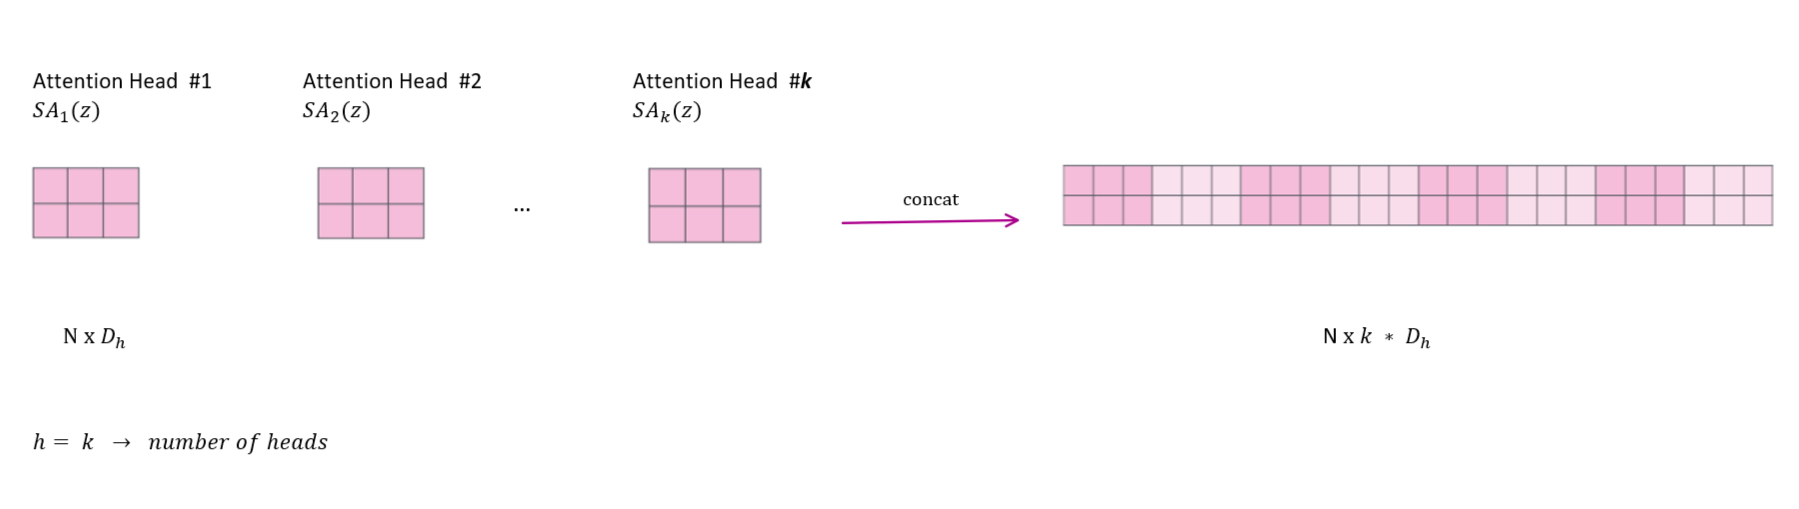 Obtaining results for each Attention Head, the number of heads is 12 in the paper